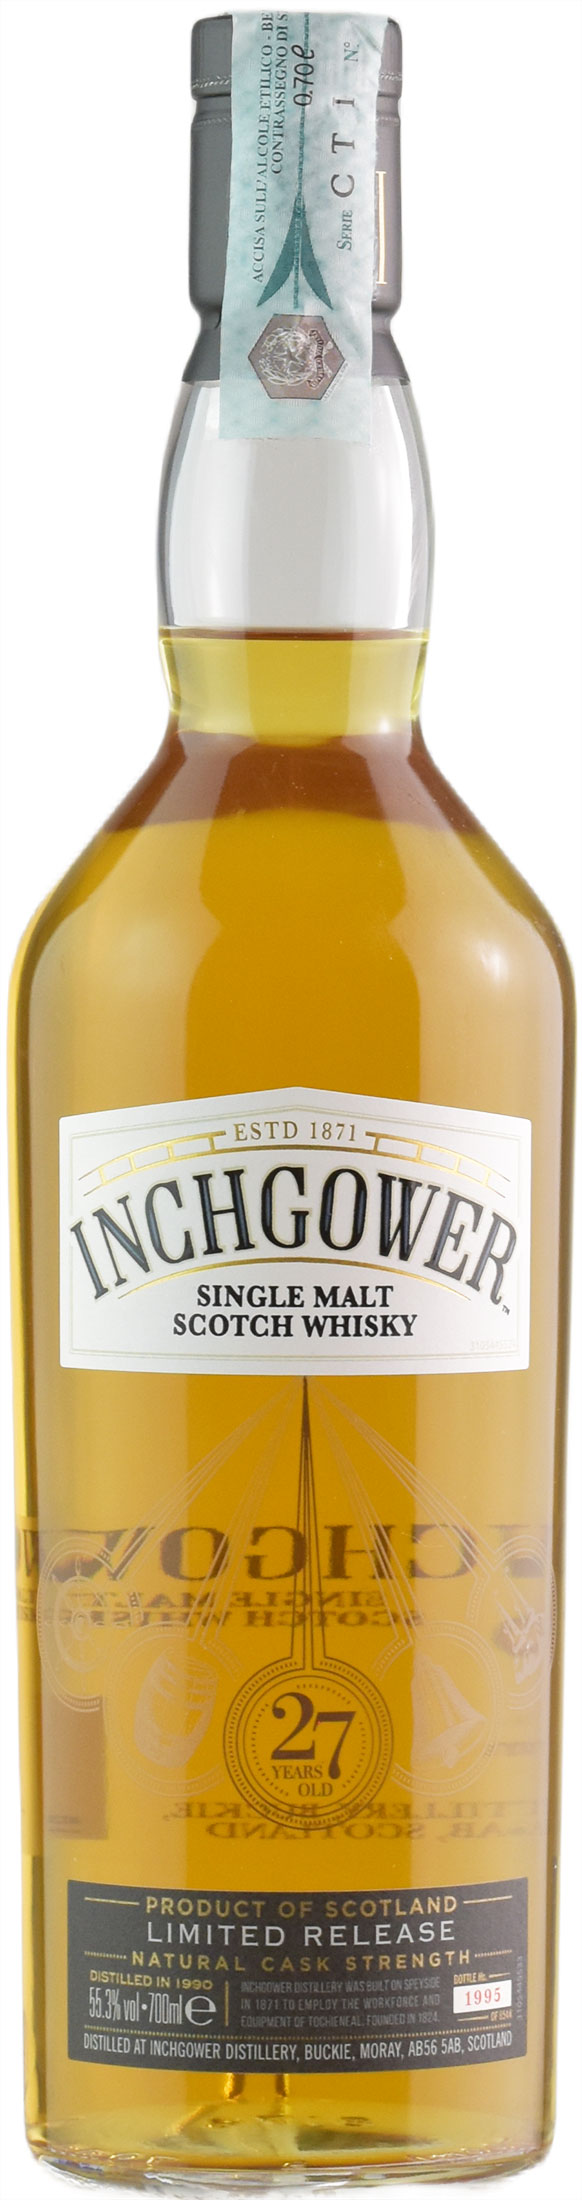 Inchgower Single Malt Scotch Whisky Limited Release Natural Cask Strenght 27 Anni